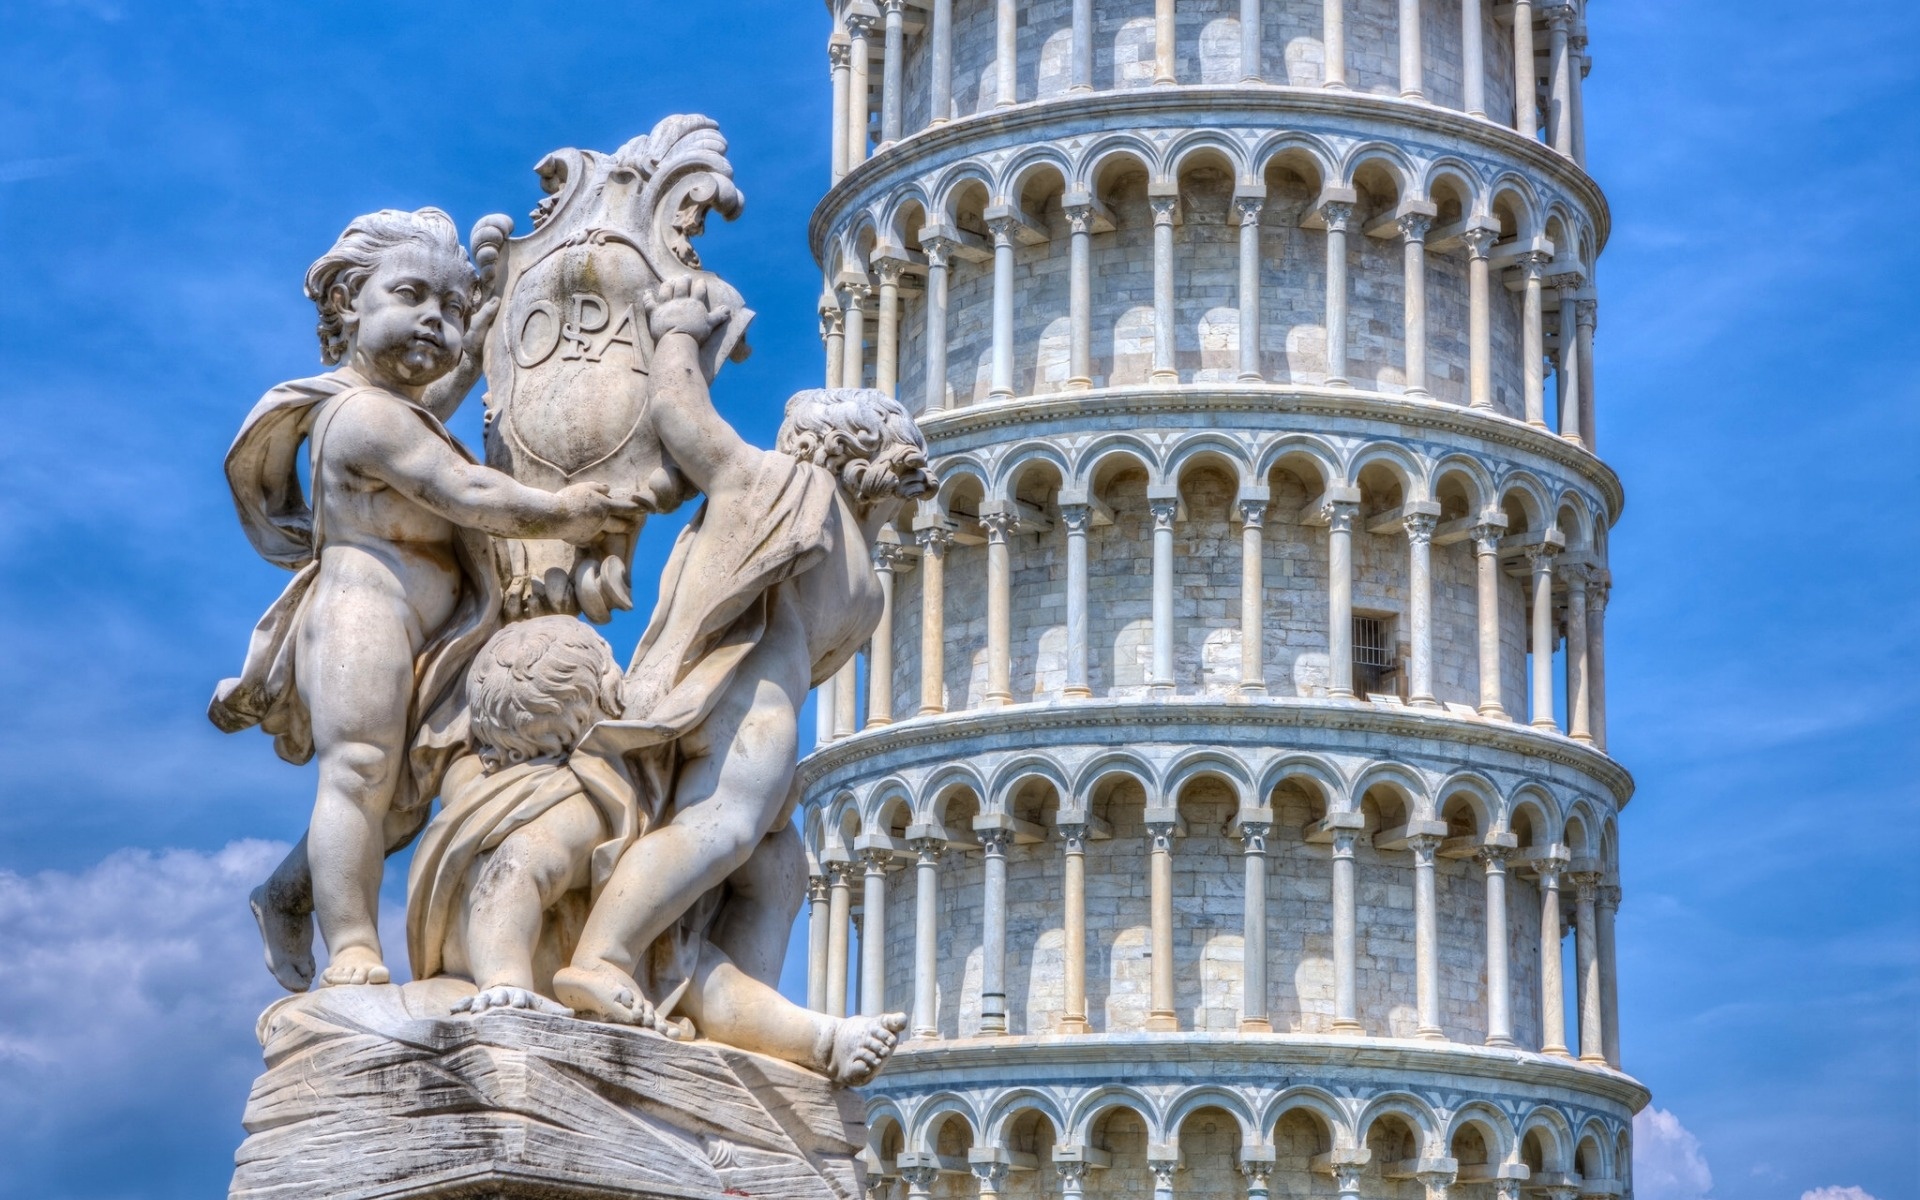 Monuments of architecture, Sights of Italy, Pisa HD wallpapers, Architectural marvel, 1920x1200 HD Desktop